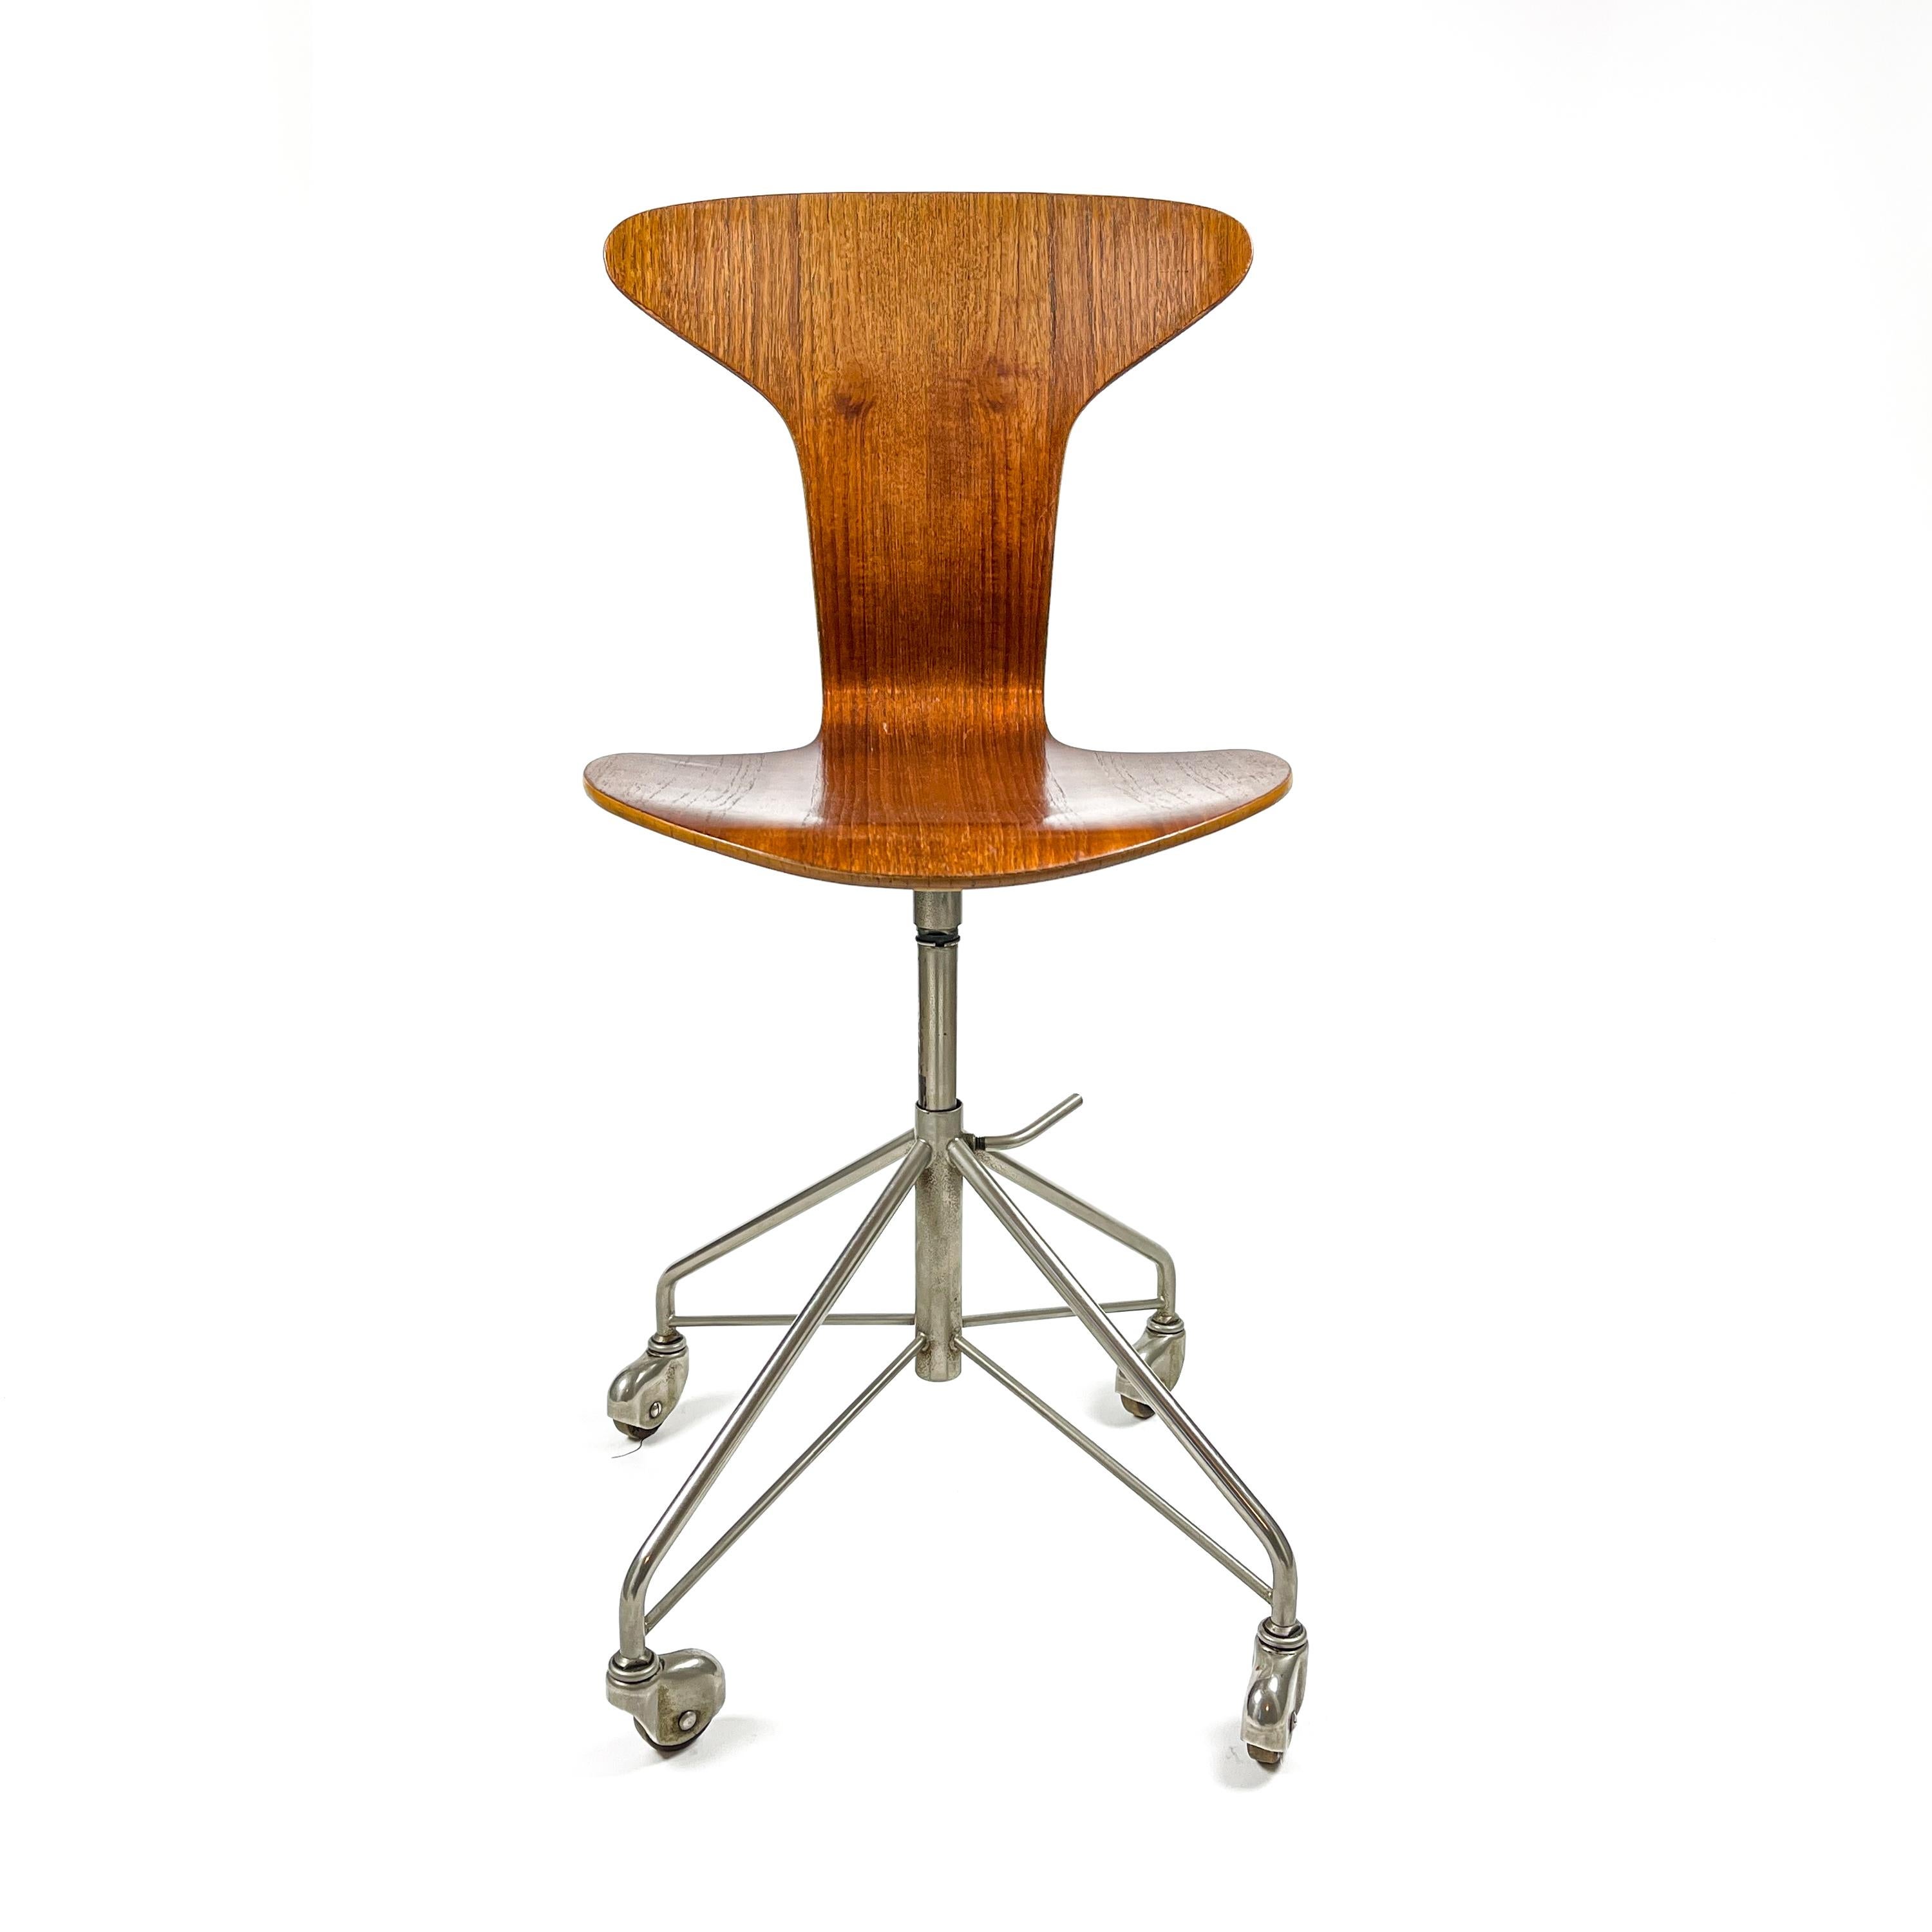 Artist
Arne jacobsen (1902 Copenhagen - 1971 Copenhagen) was a Danish architect and designer best known for his contribution to architectural functionalism and for the worldwide success he enjoyed with simple well-designed chairs.

Jacobsen